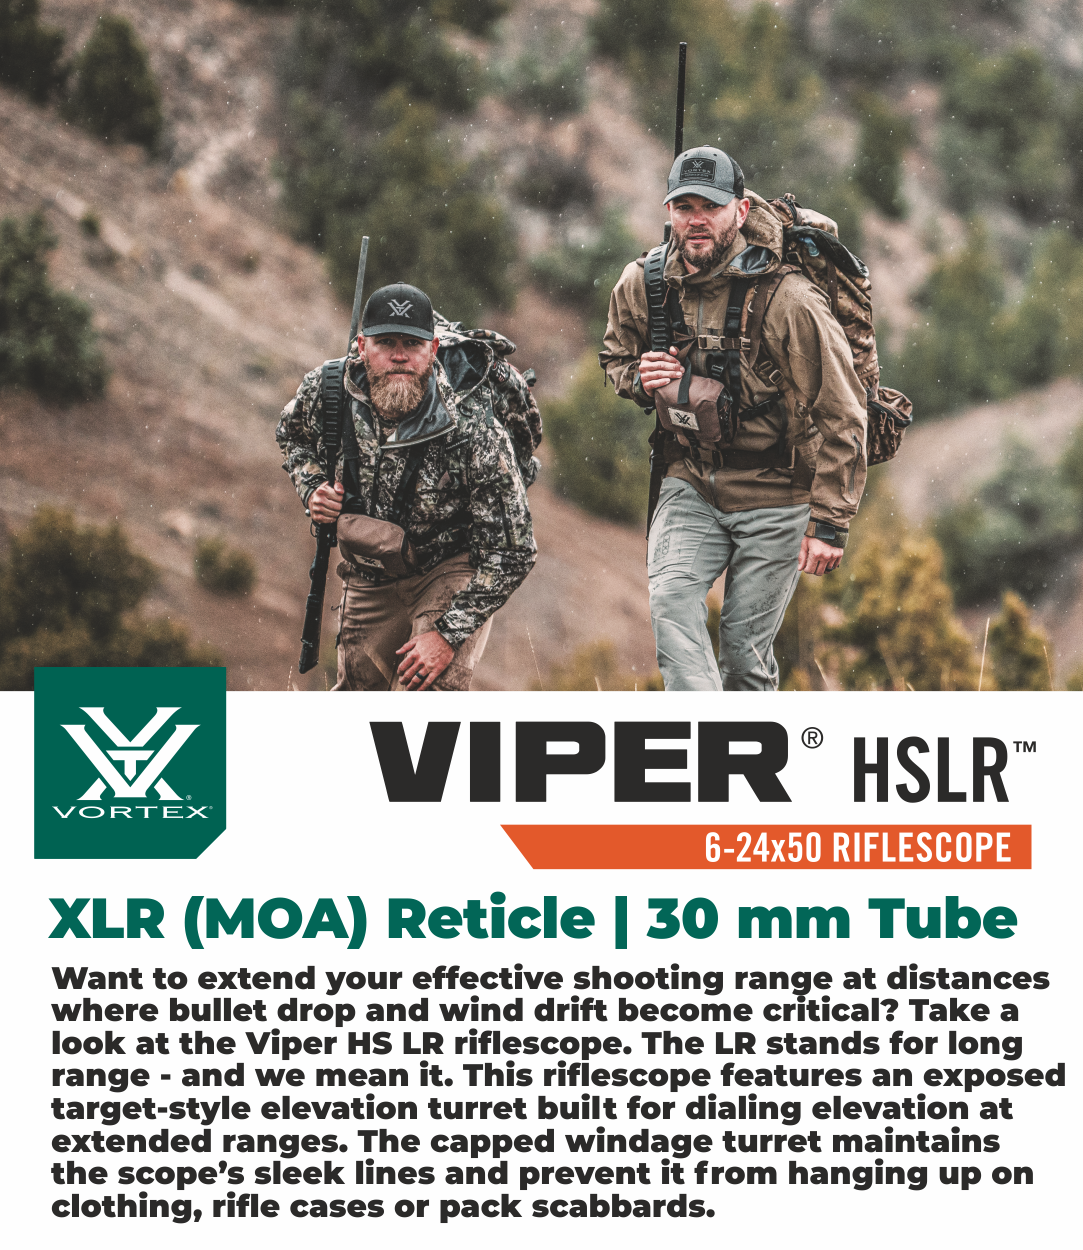 Vortex Optics Viper HSLR 6-24X50 XLR (MOA) FFP, 30 mm Tube with Pro 30mm High Rings (1.18in) and Free Hat Bundle - image 5 of 7